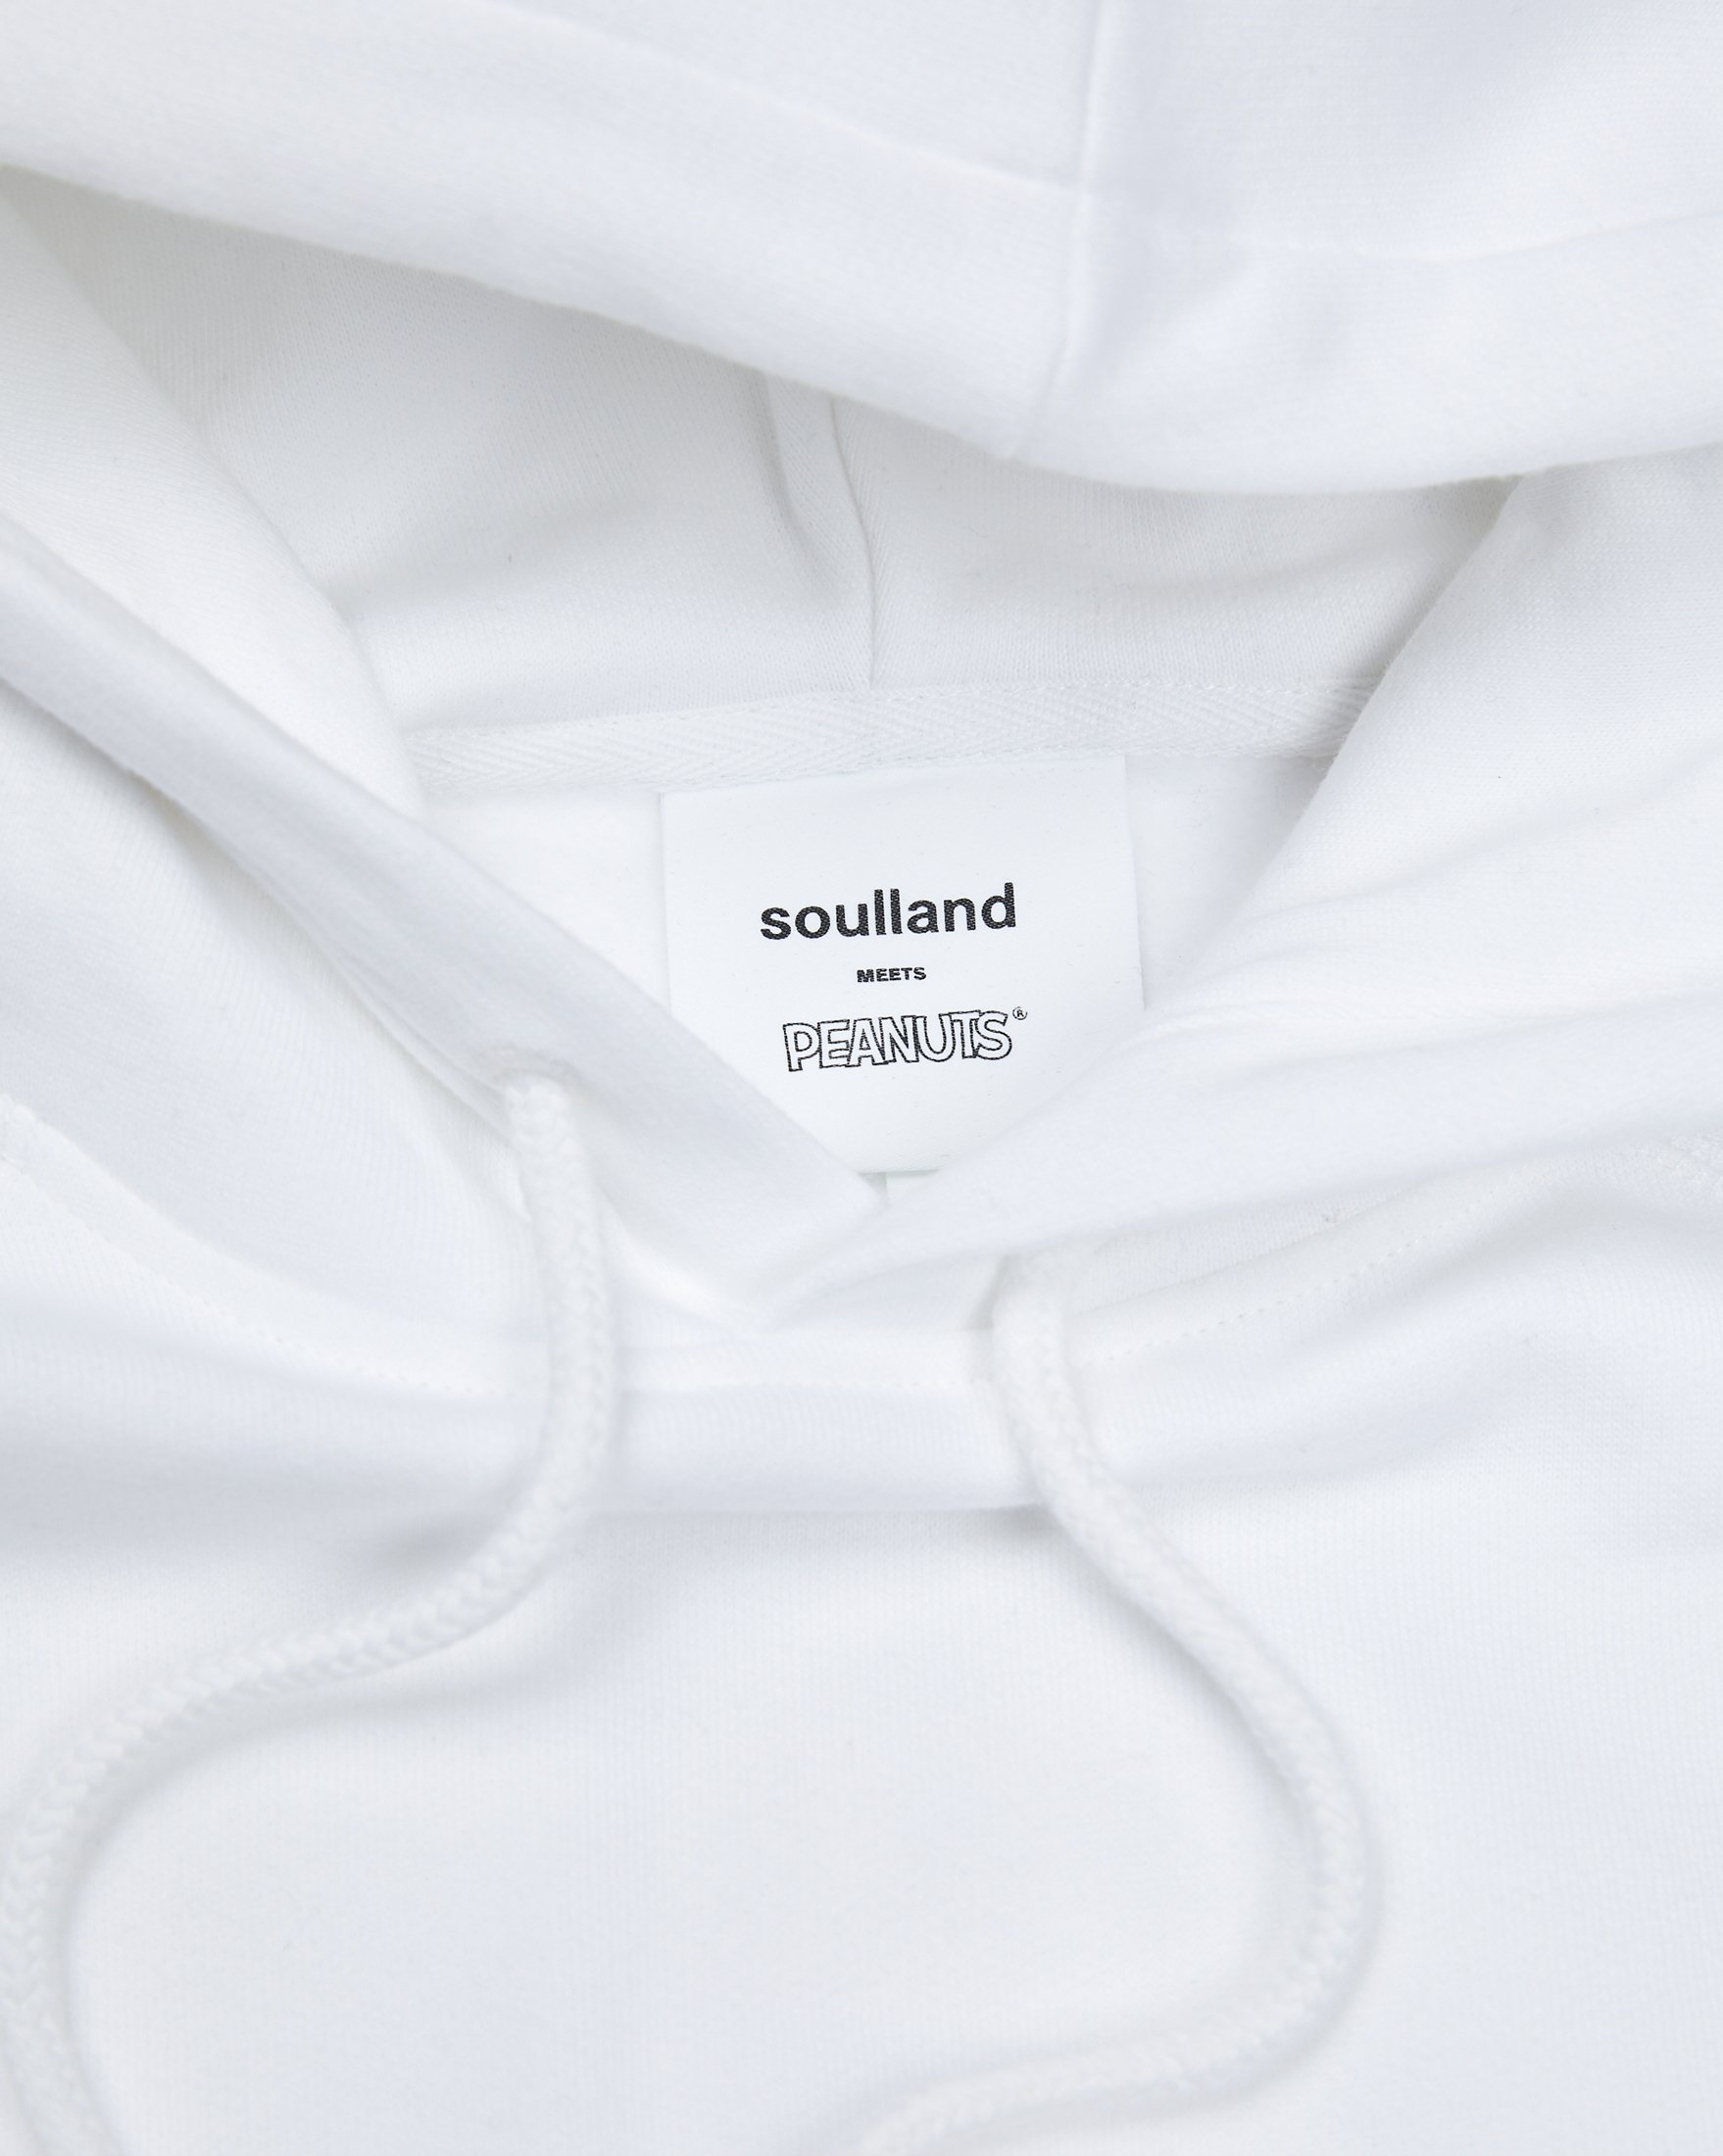 Colette Mon Amour x Soulland - Snoopy Bed White Hoodie - Clothing - White - Image 3